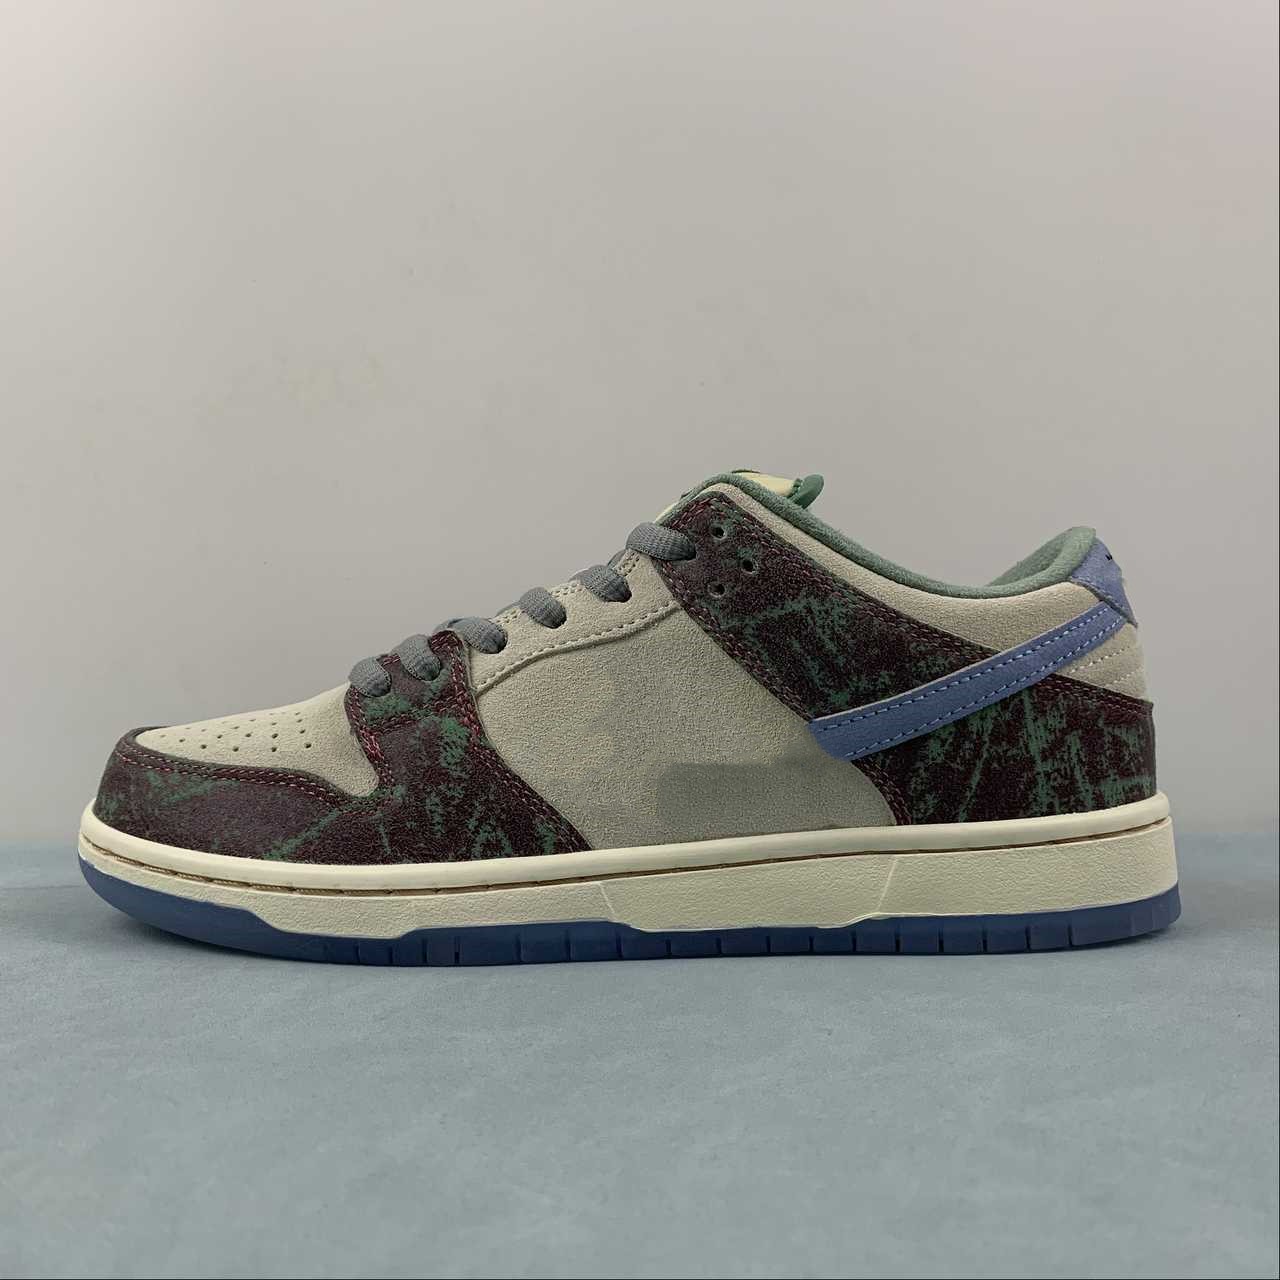 

Dunks Low Basketball Shoes Crenshaw Skate Club Outdoor Running Sports Sneakers shoes With Original Box